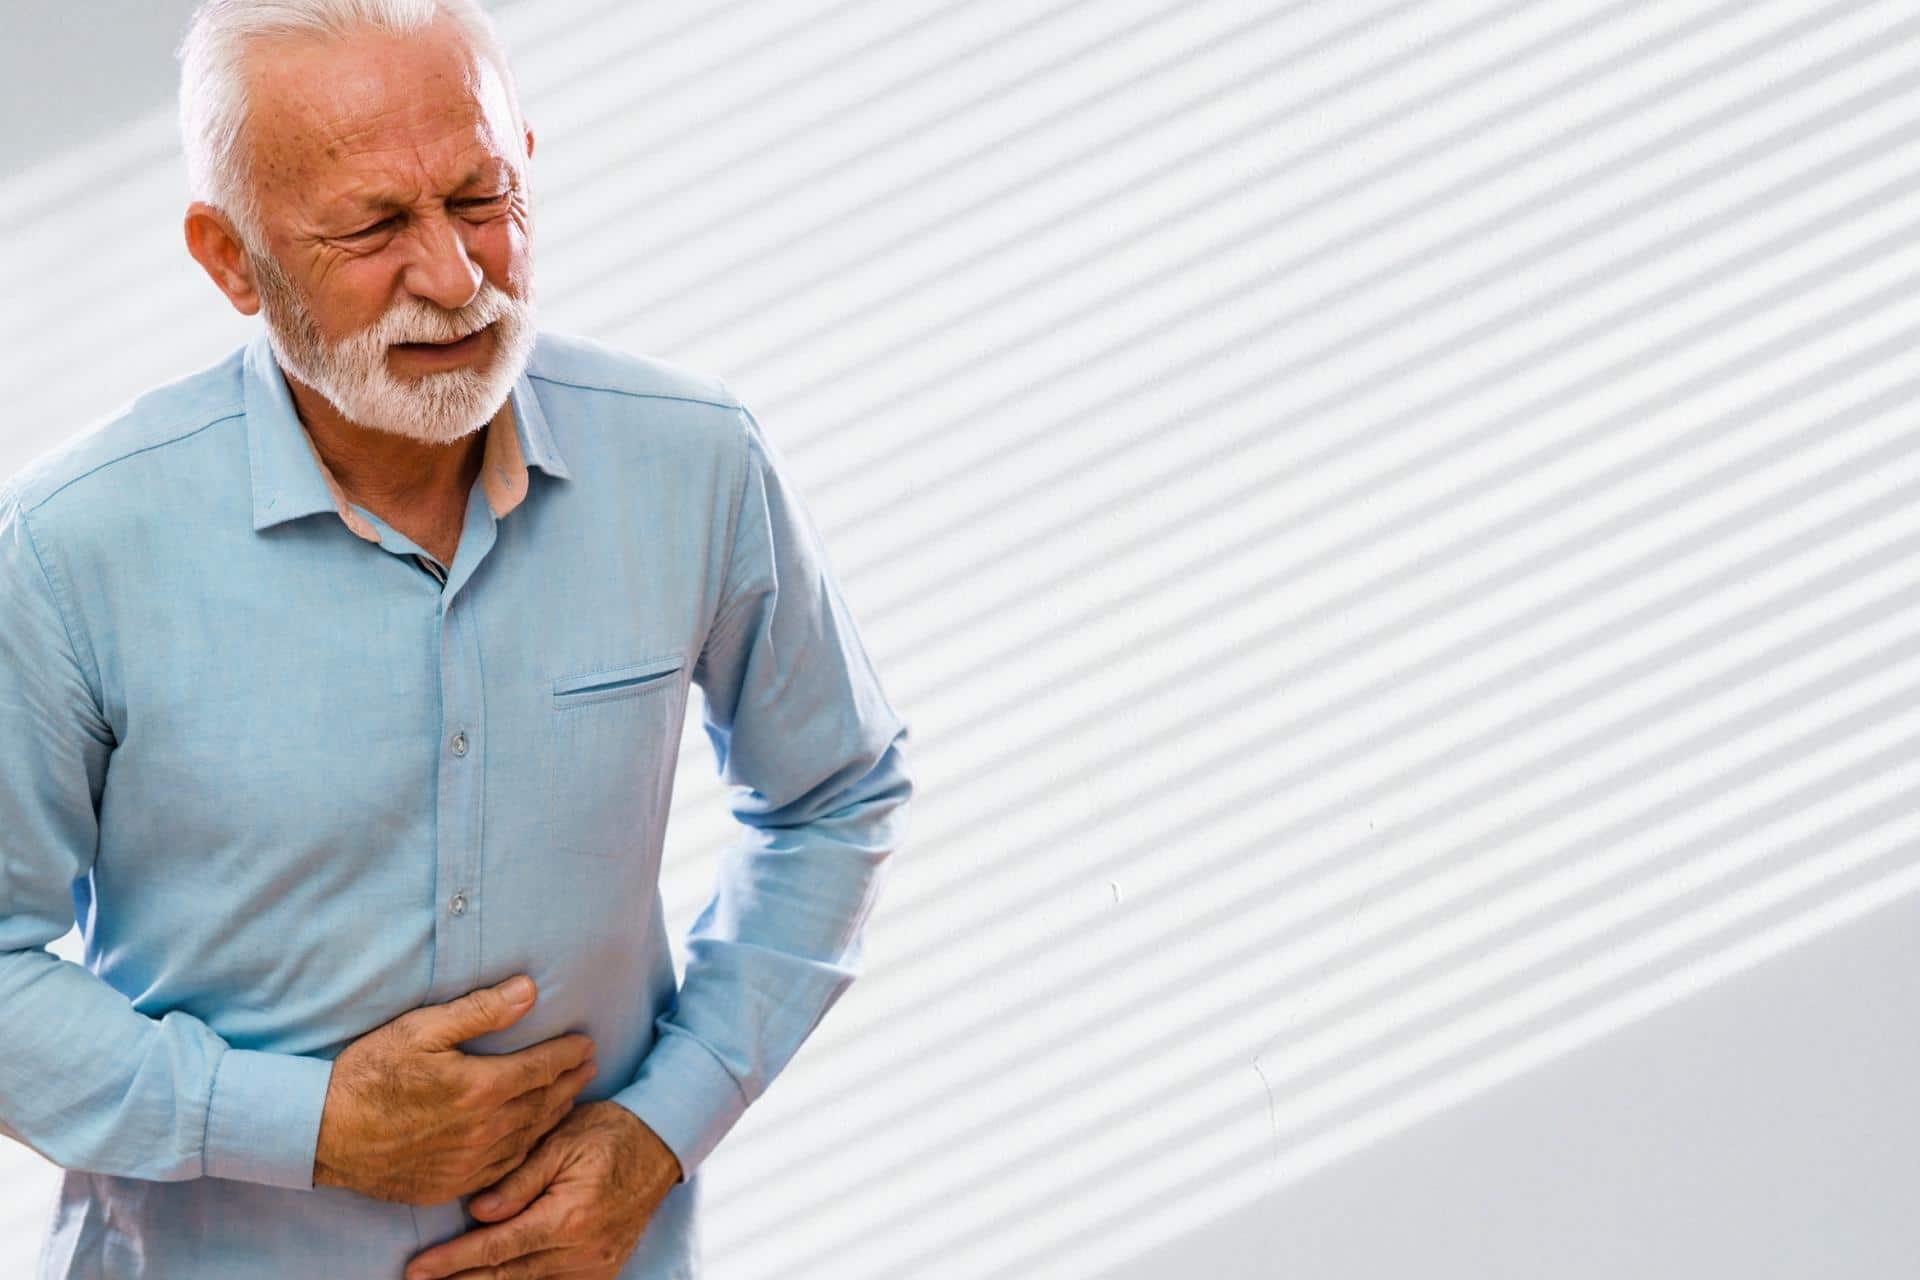 Older white man holding stomach and grimacing due to nausea from cannabinoid hyperemesis syndrome (CHS).